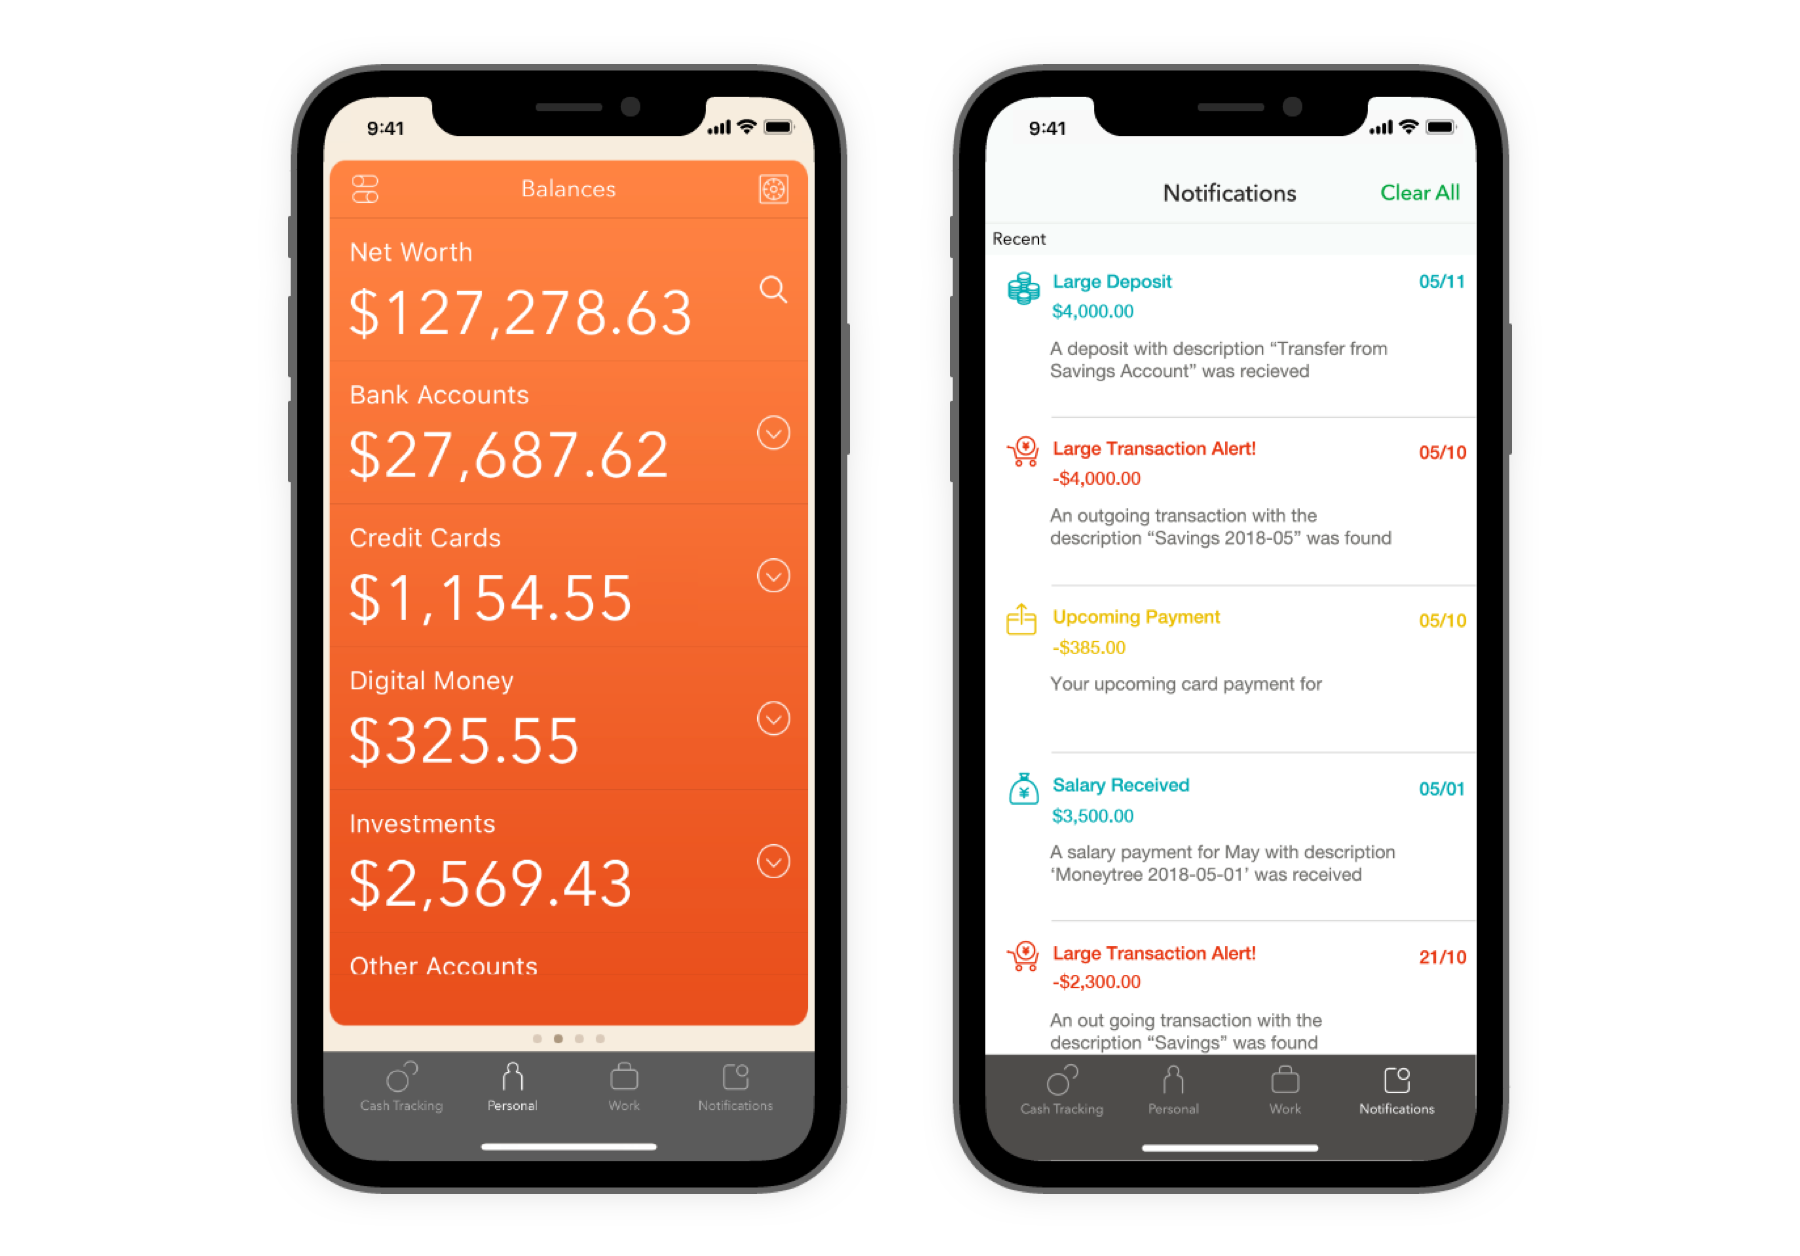 Views of the balances and notifications screens in the Moneytree app